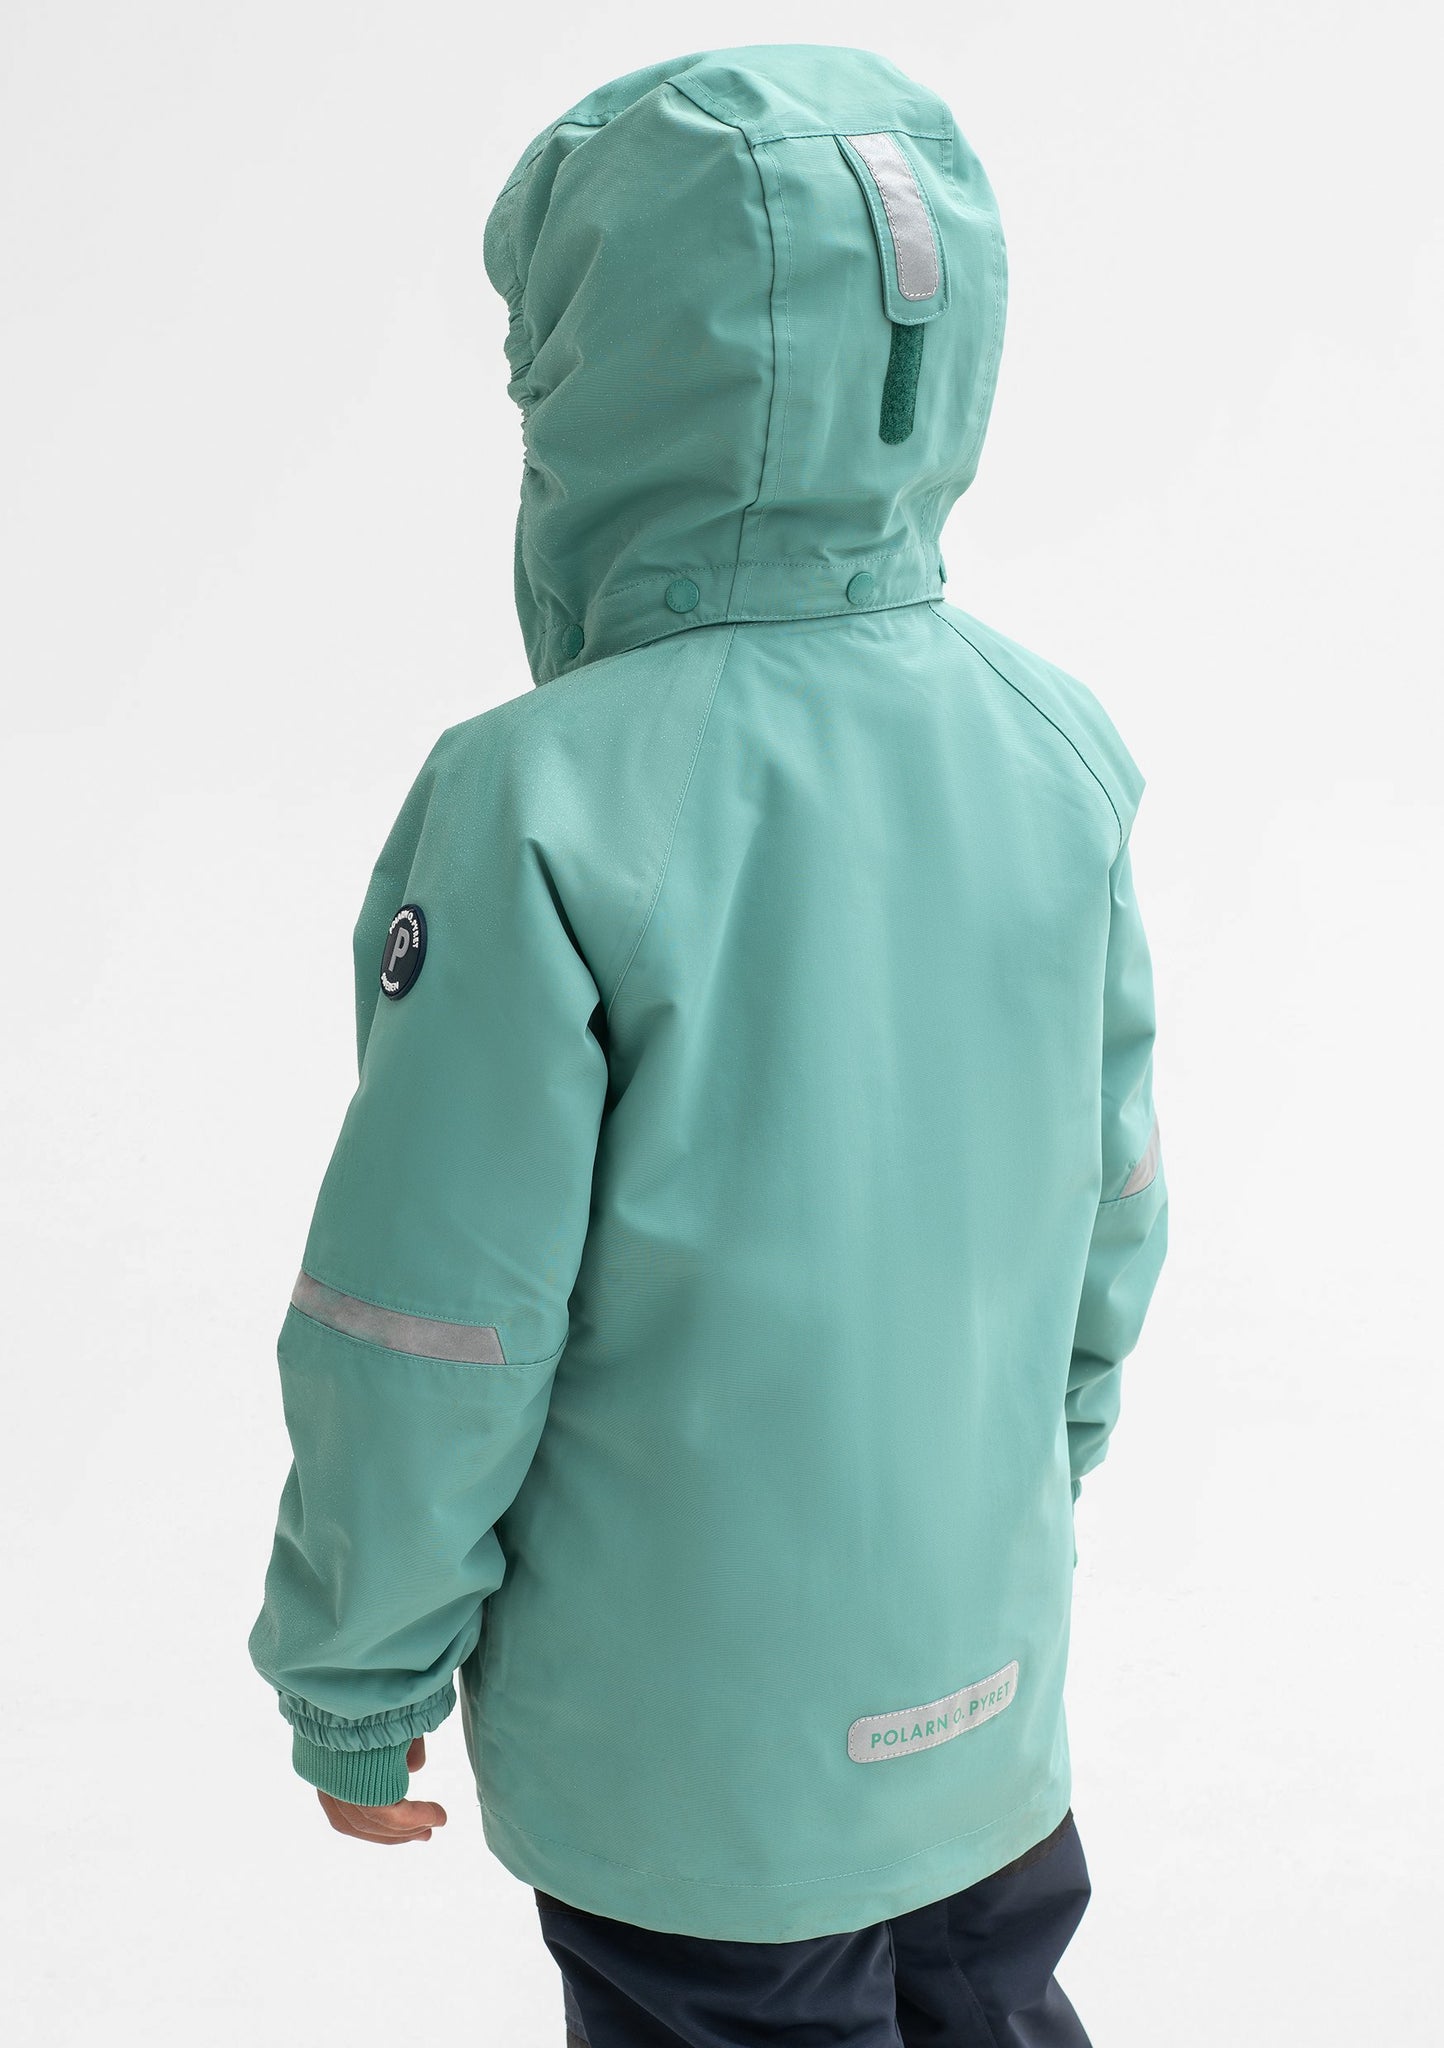 Back view of a boy wearing a green, kids waterproof jacket made of lightweight fabric, with silver reflectors on the sleeves.